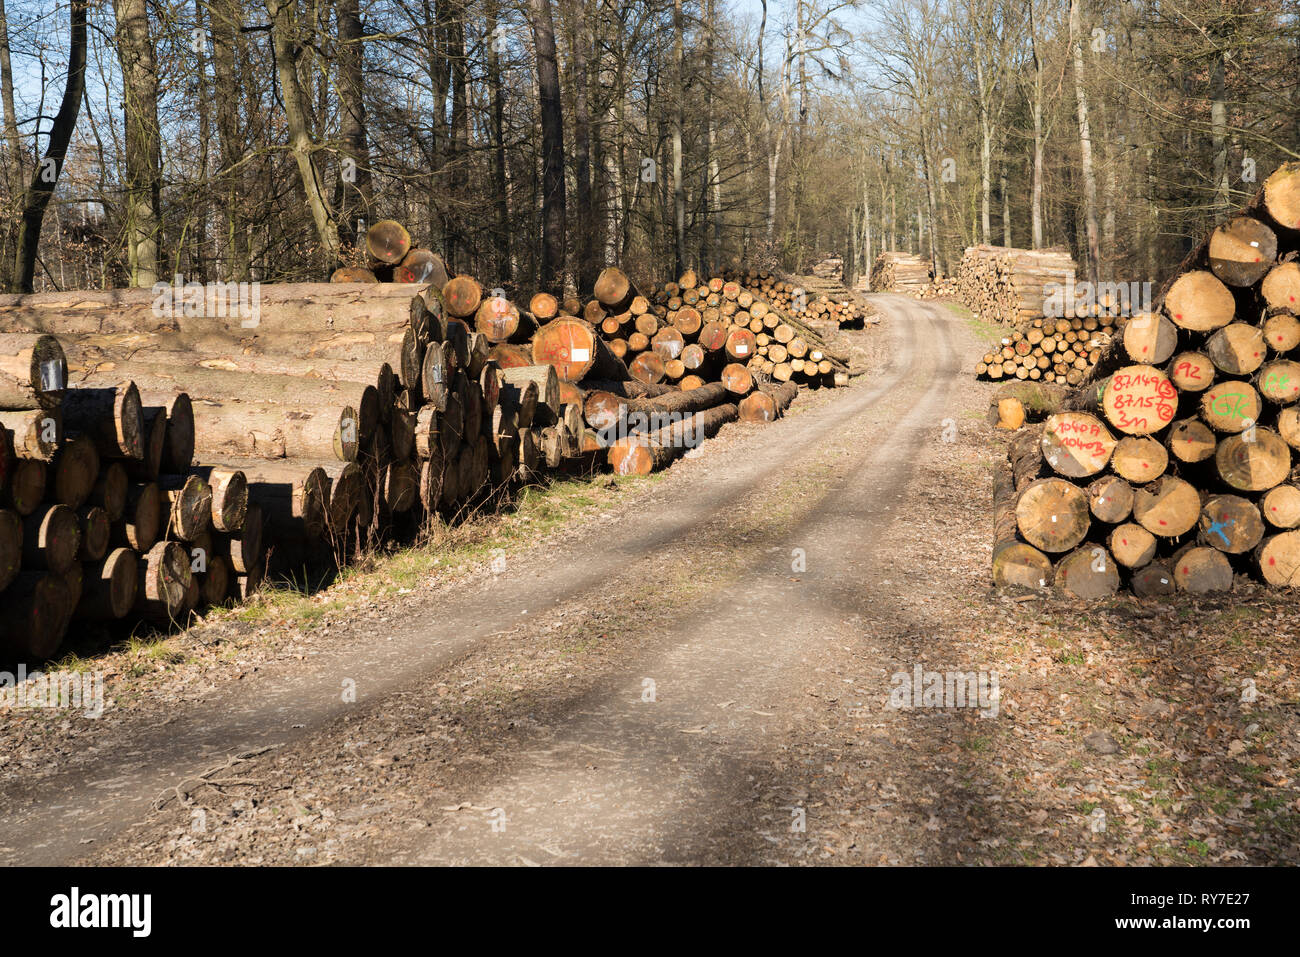 Forestry after Cyclone Friederike, near Oberweser, Weser Uplands, Weserbergland, Hesse, Germany Stock Photo